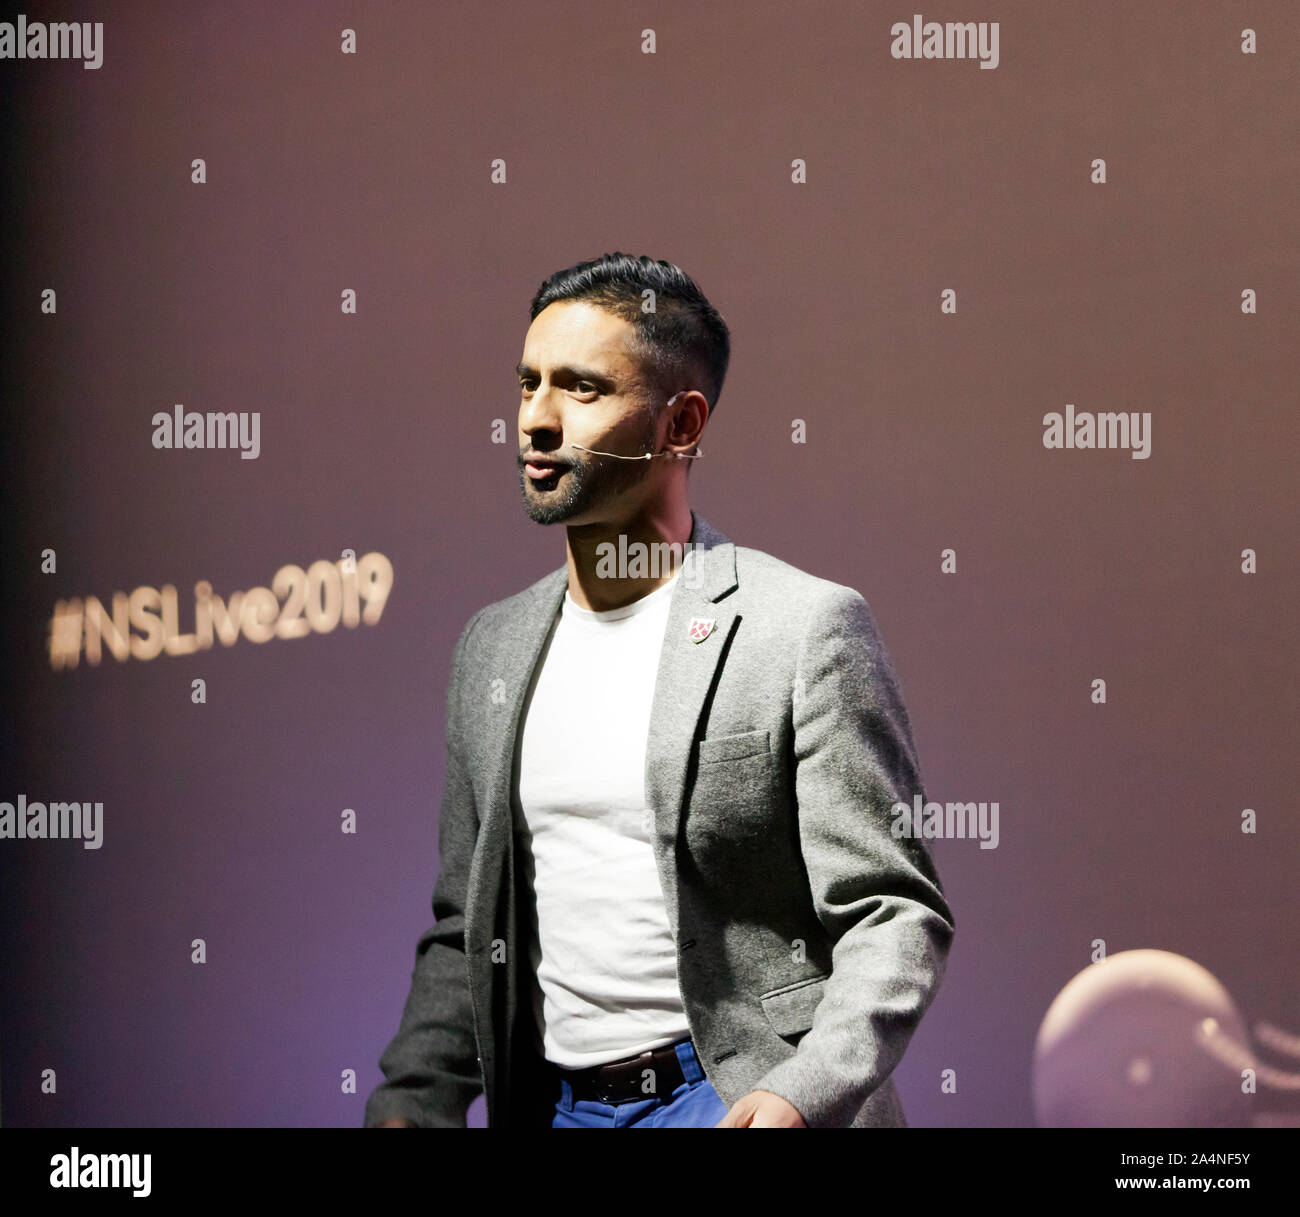 Mathematician, Bobby Seagull, giving a talk 'Maths is All Around Us', on the Engineering Stage at New Scientist Live 2019 Stock Photo